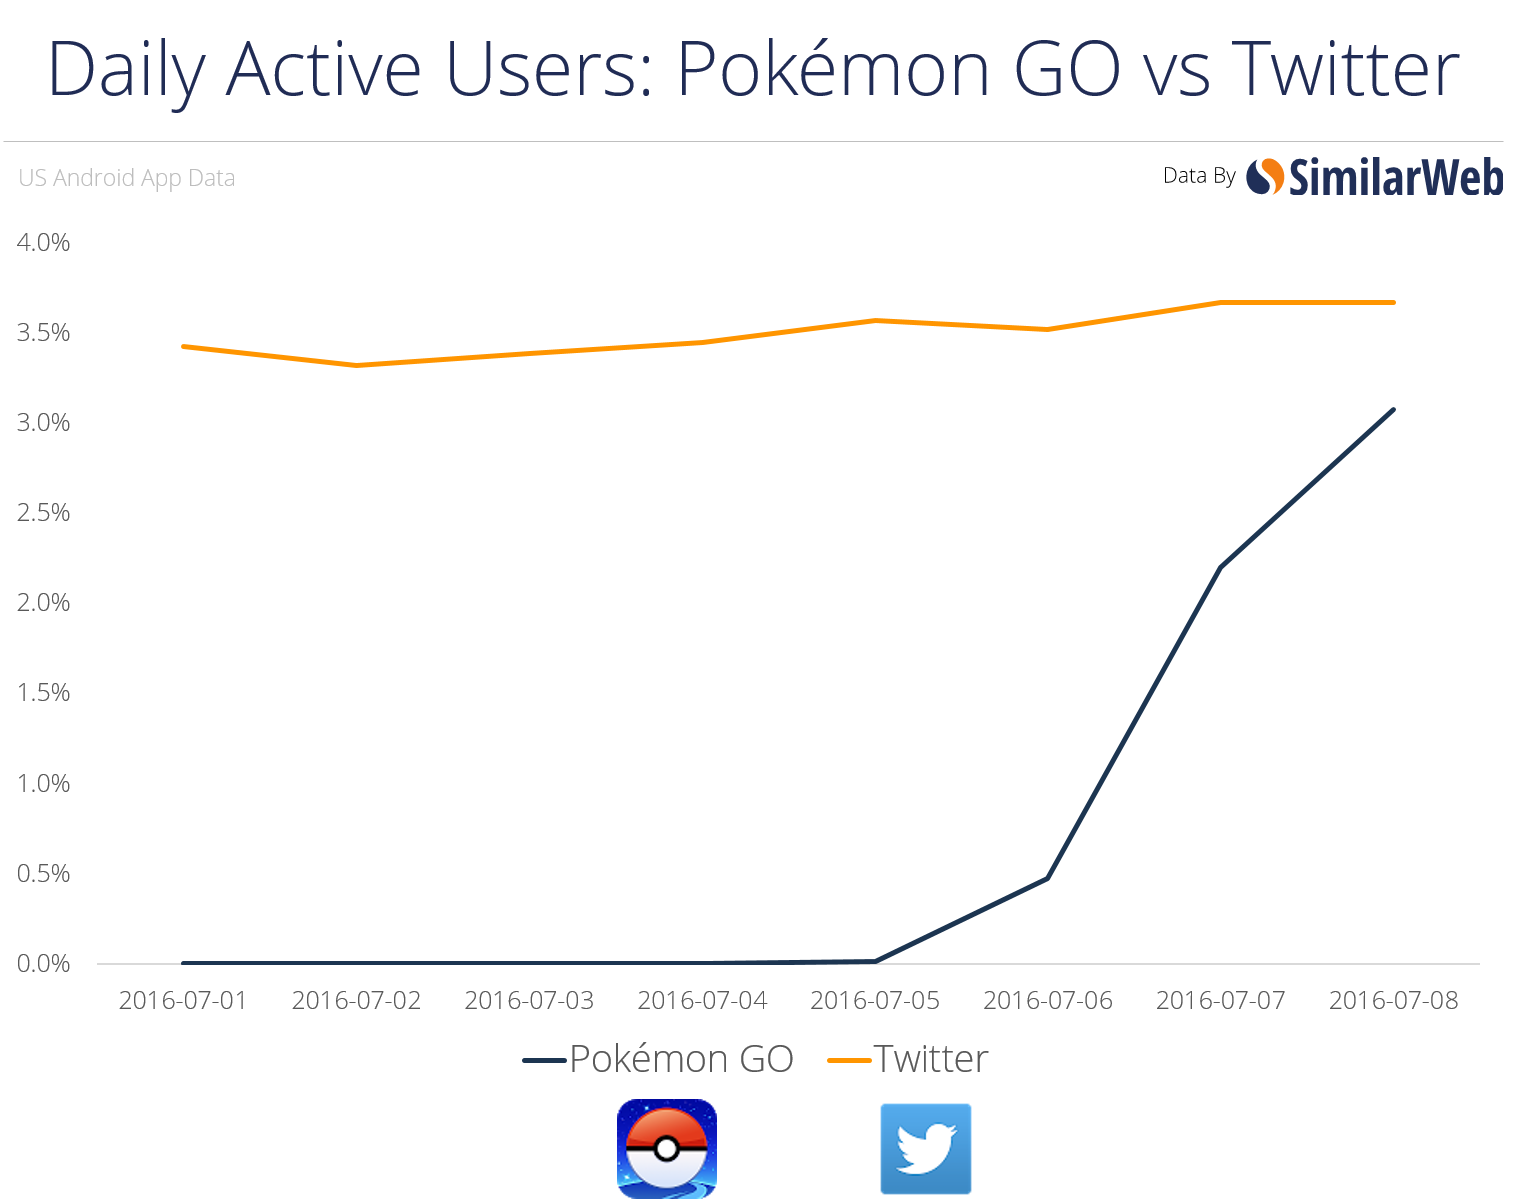 Daily Active Users for Pokémon GO quickly catching up to Twitter.